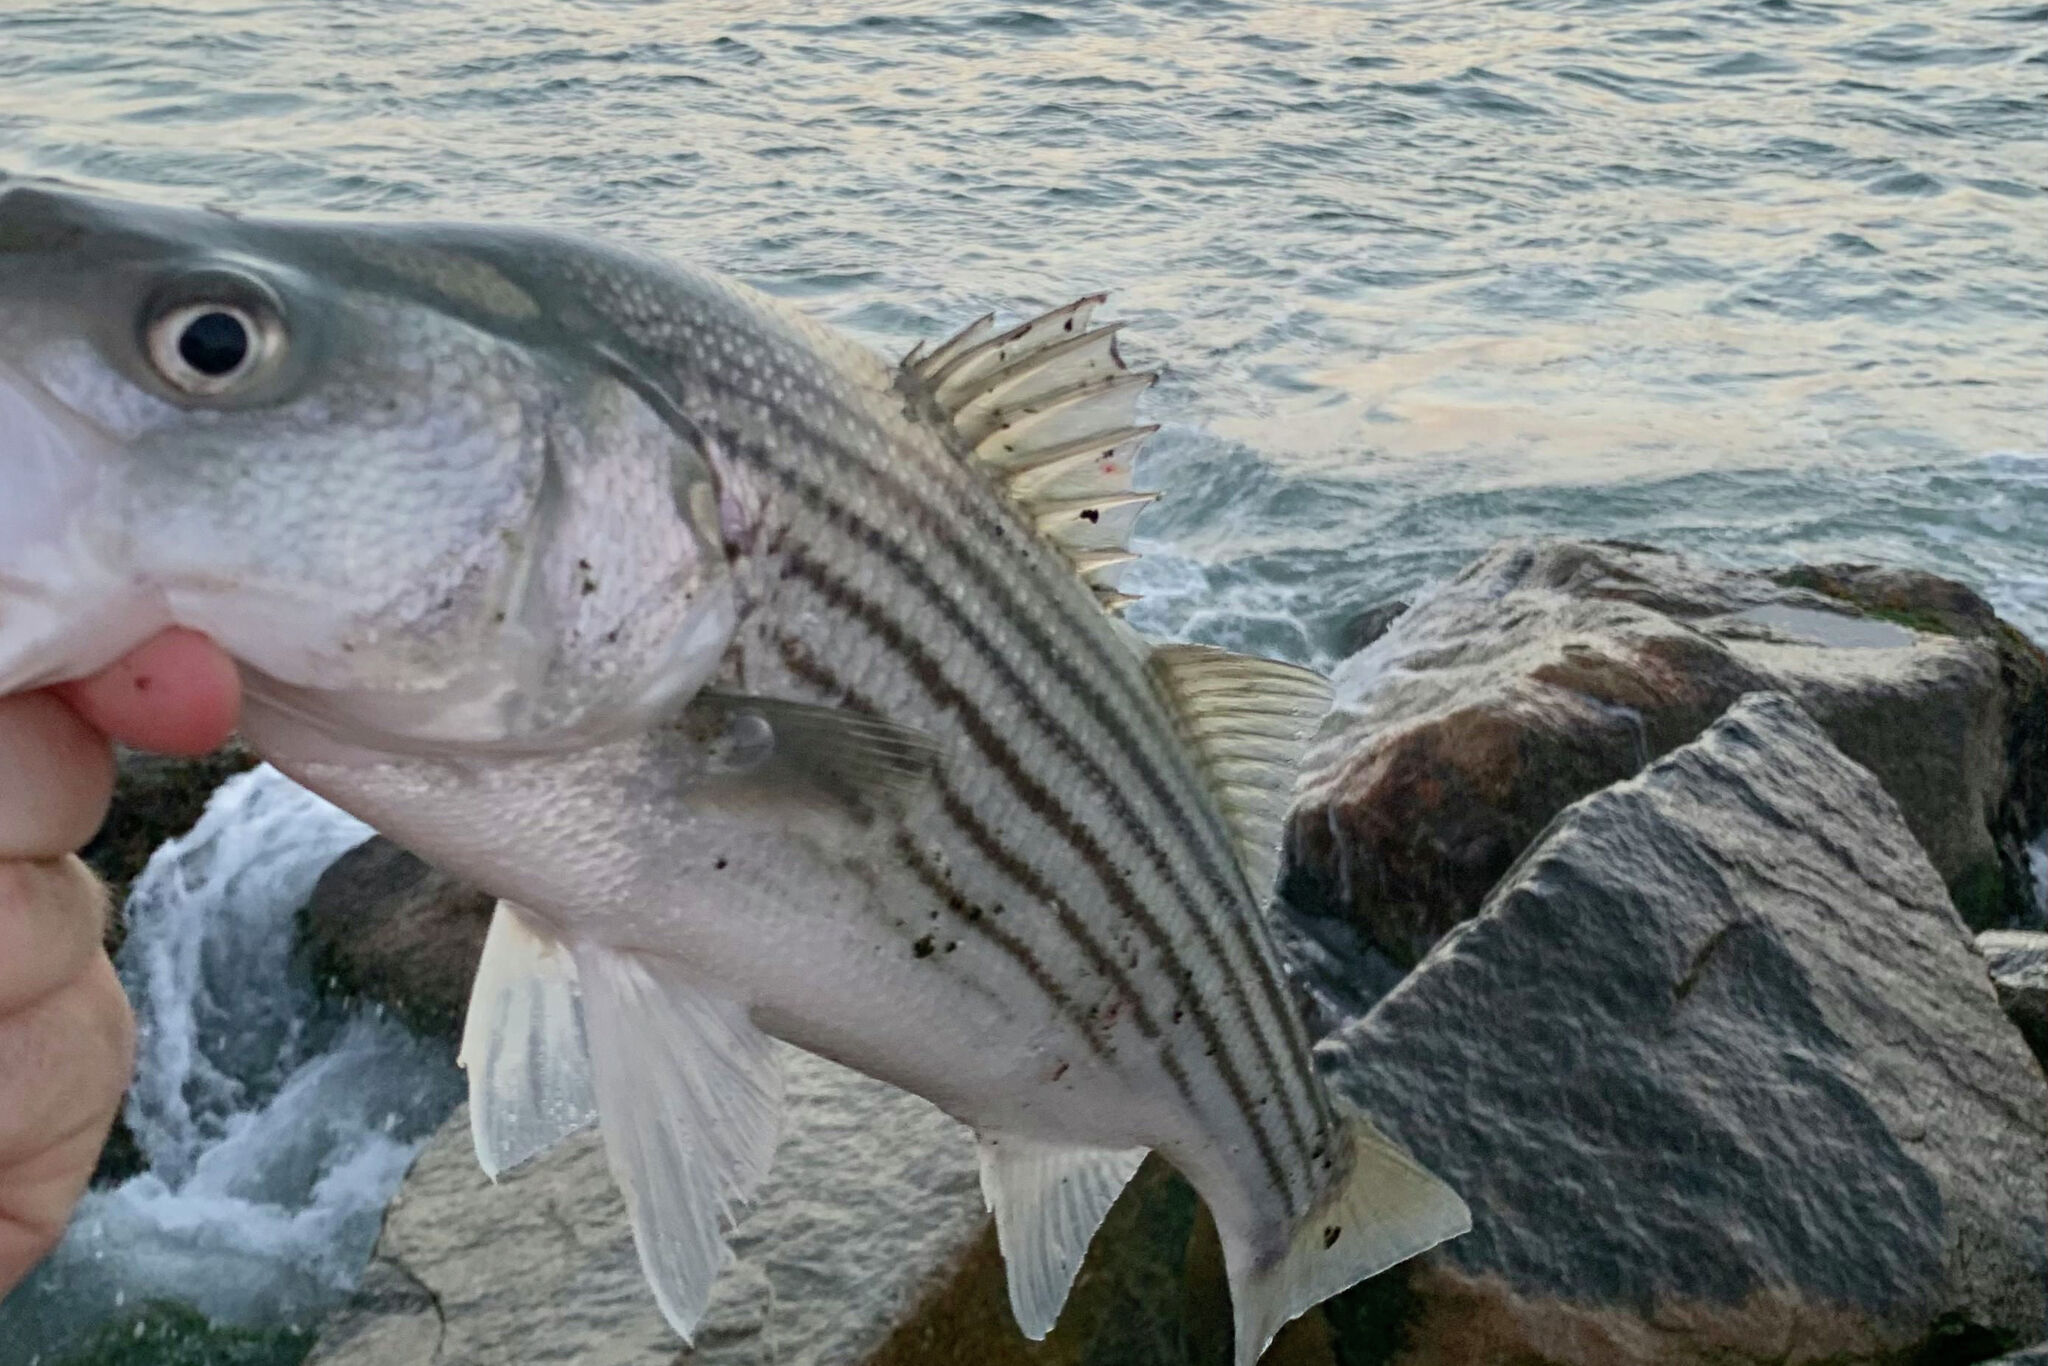 Beginner's guide to striped bass fishing in the Hudson